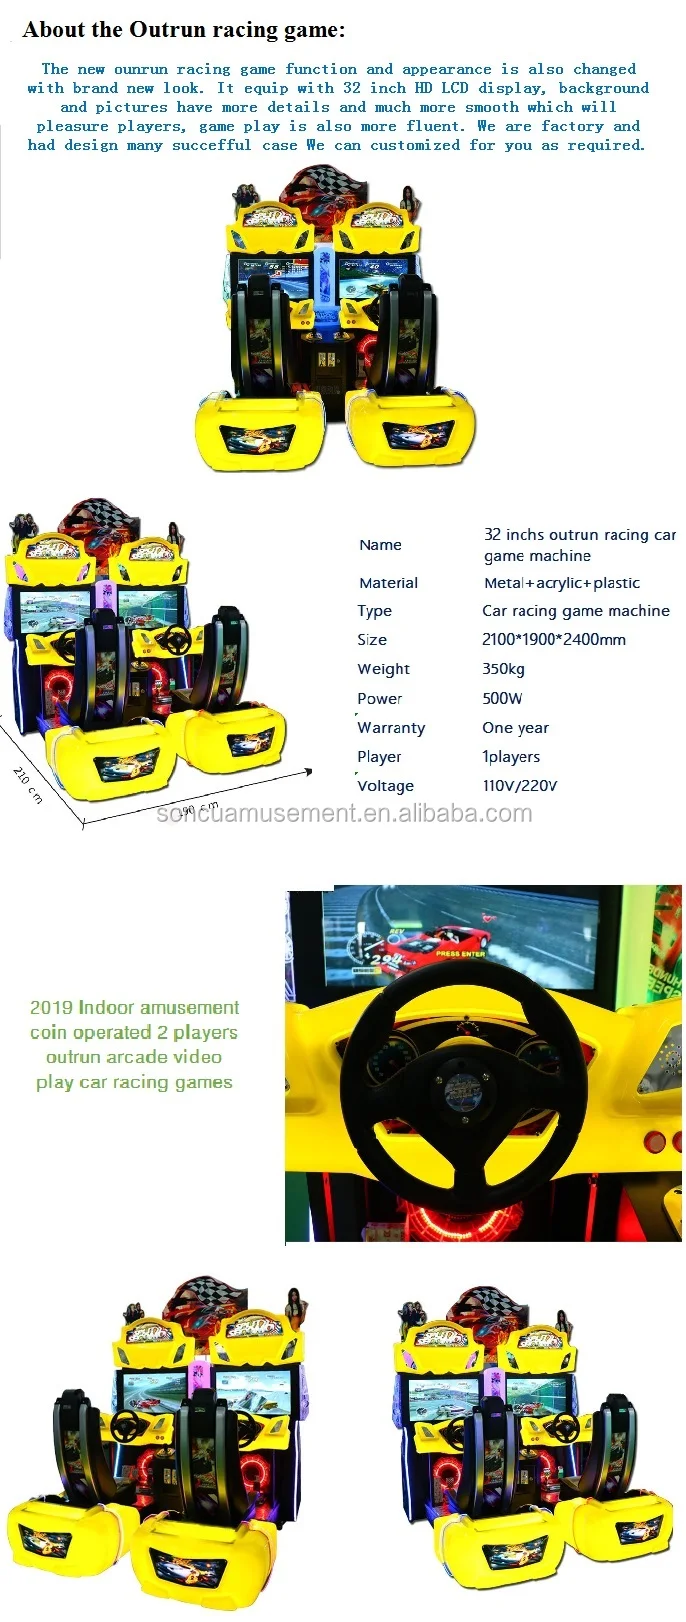 2019 Indoor amusement coin operated 2 players outrun arcade video play car racing games